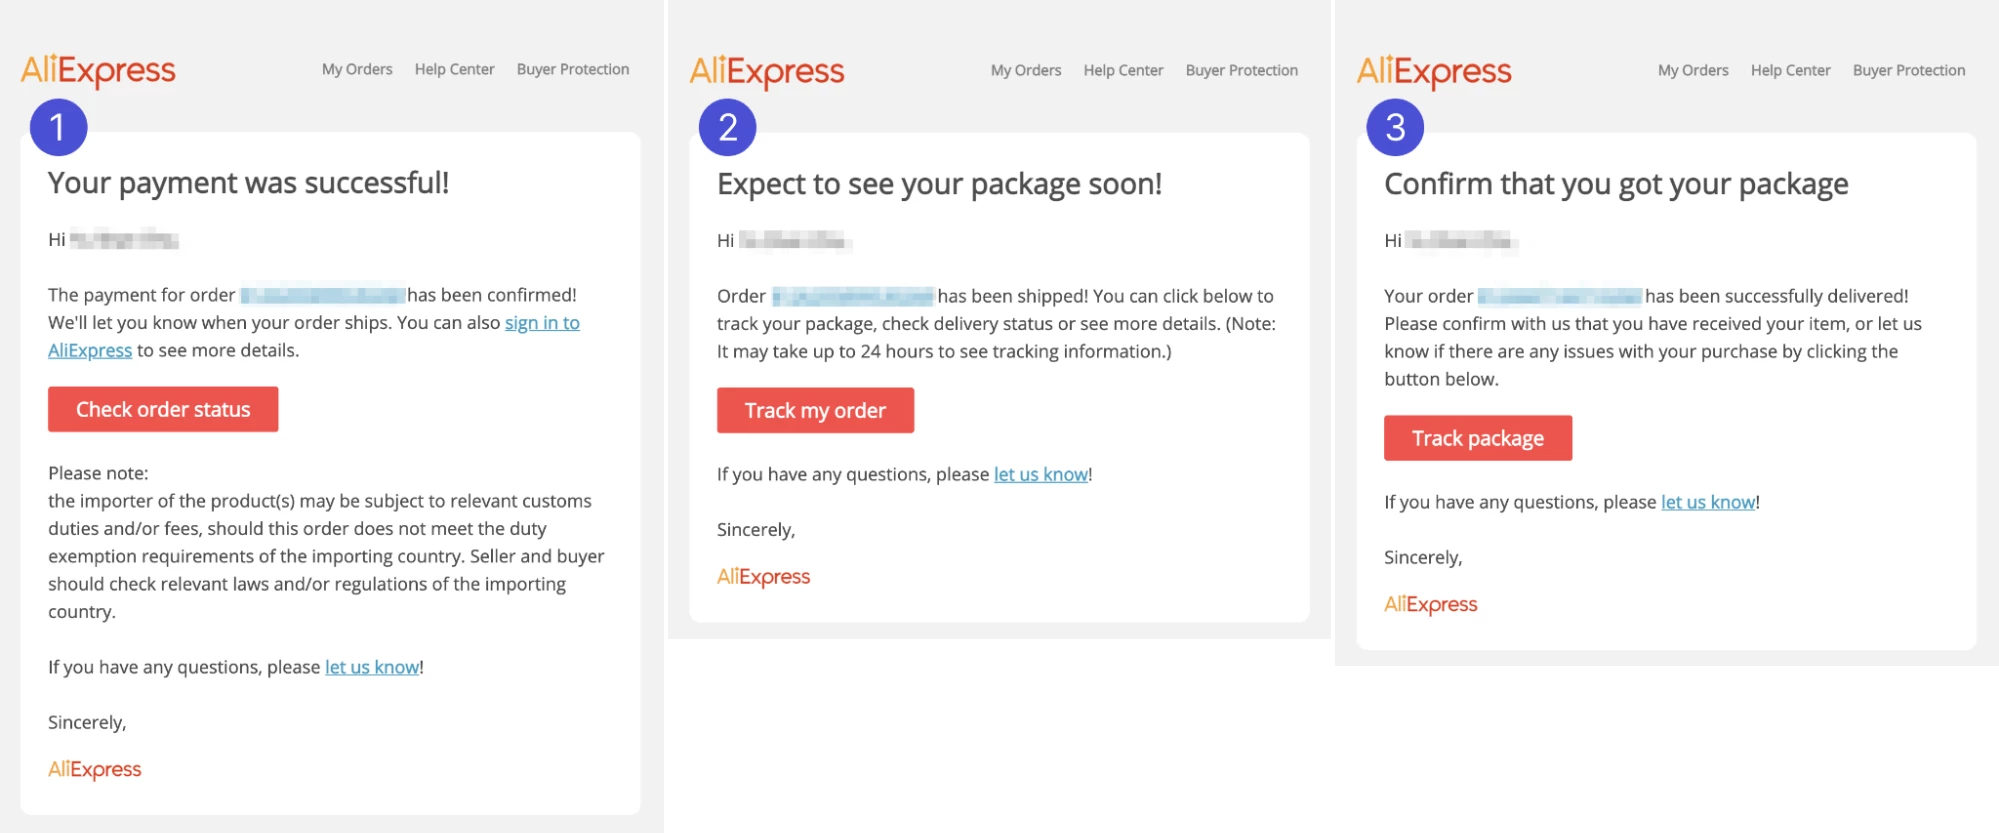 AliExpress confirmation emails